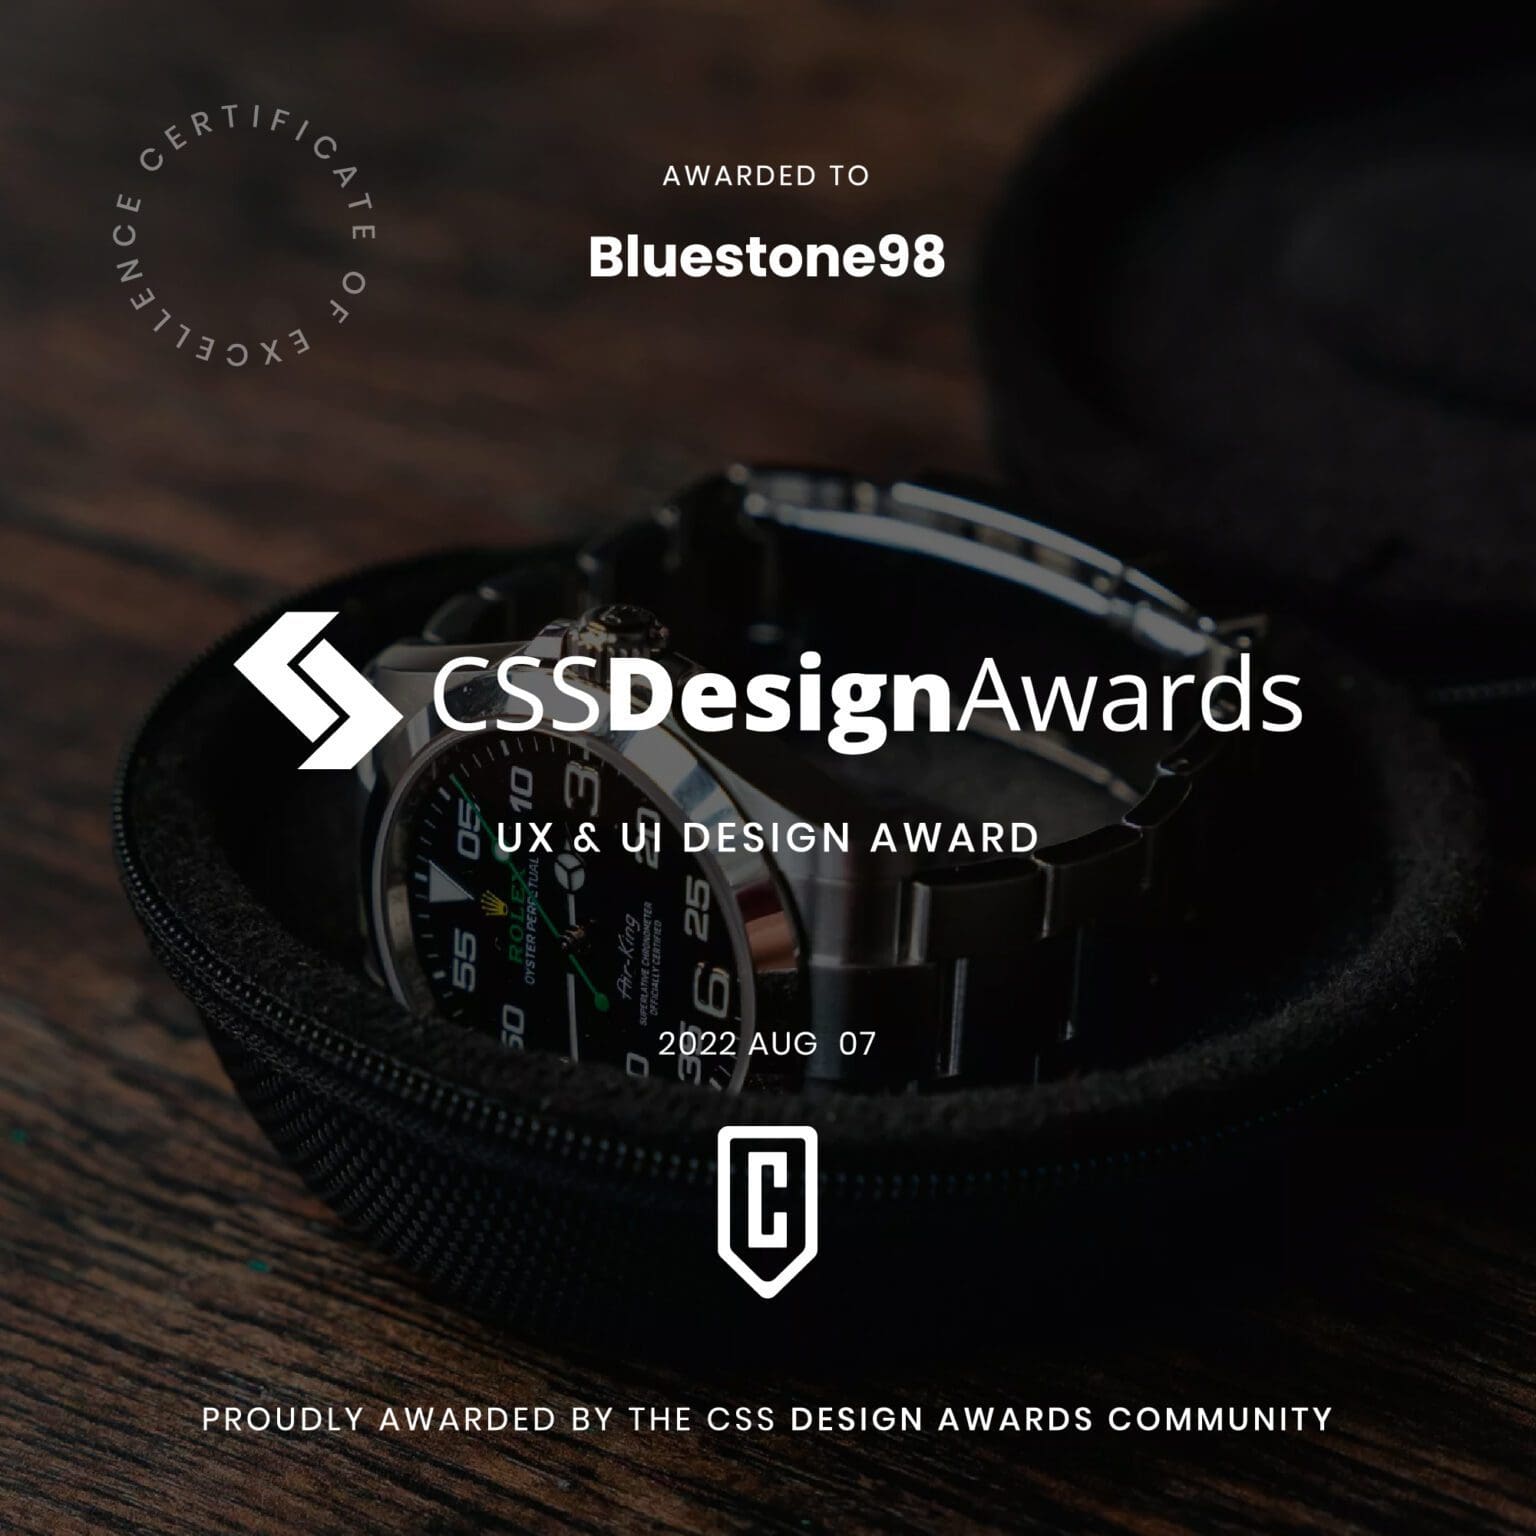 Ux & UI Design Award by Bluestone98 for cased In Time